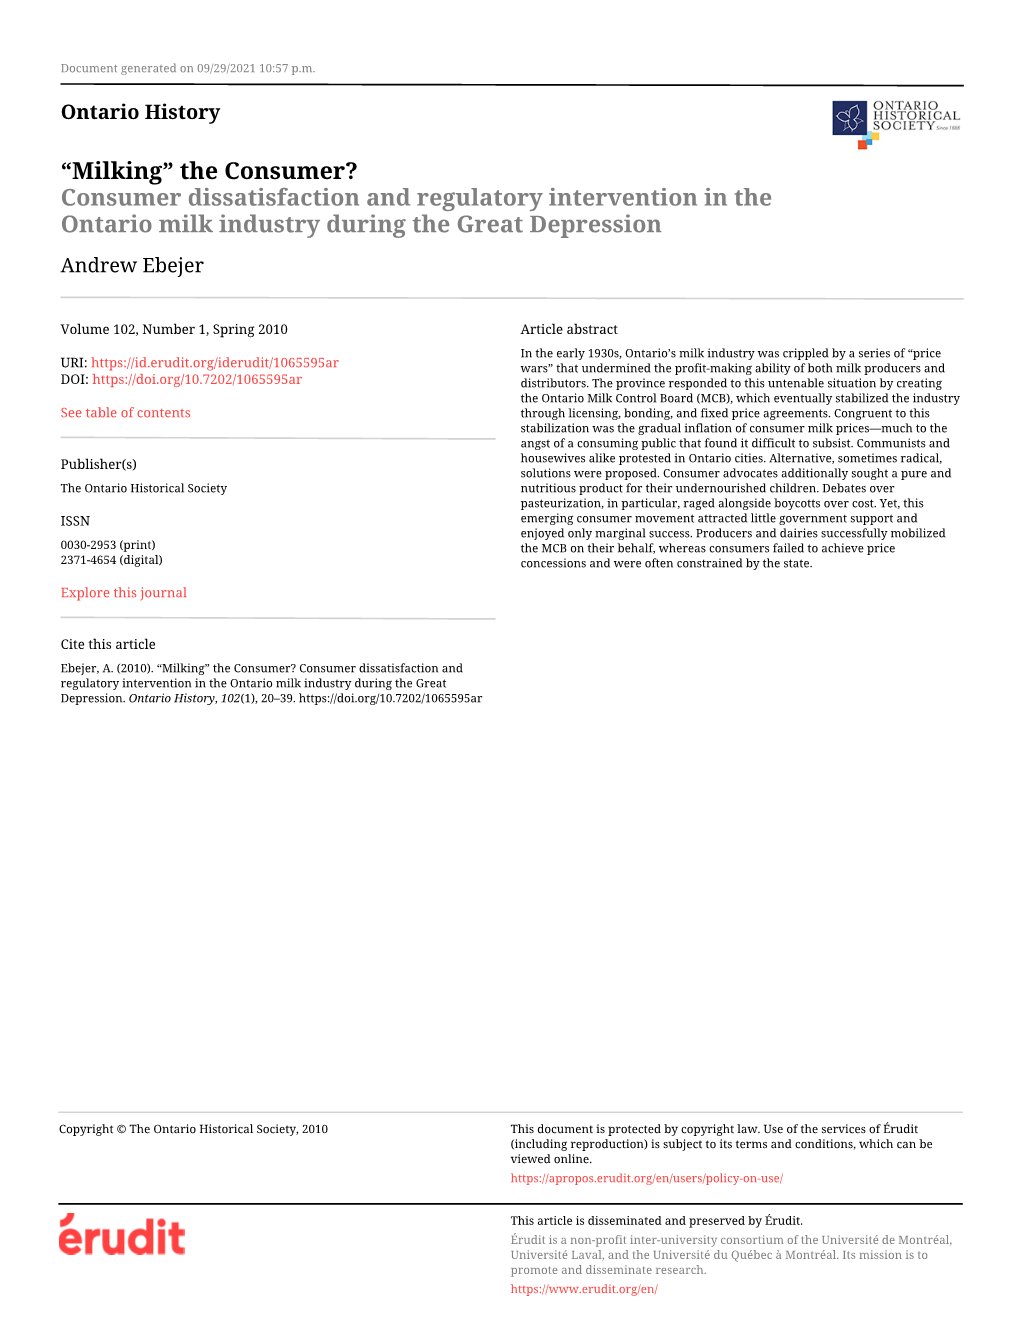 Consumer Dissatisfaction and Regulatory Intervention in the Ontario Milk Industry During the Great Depression Andrew Ebejer